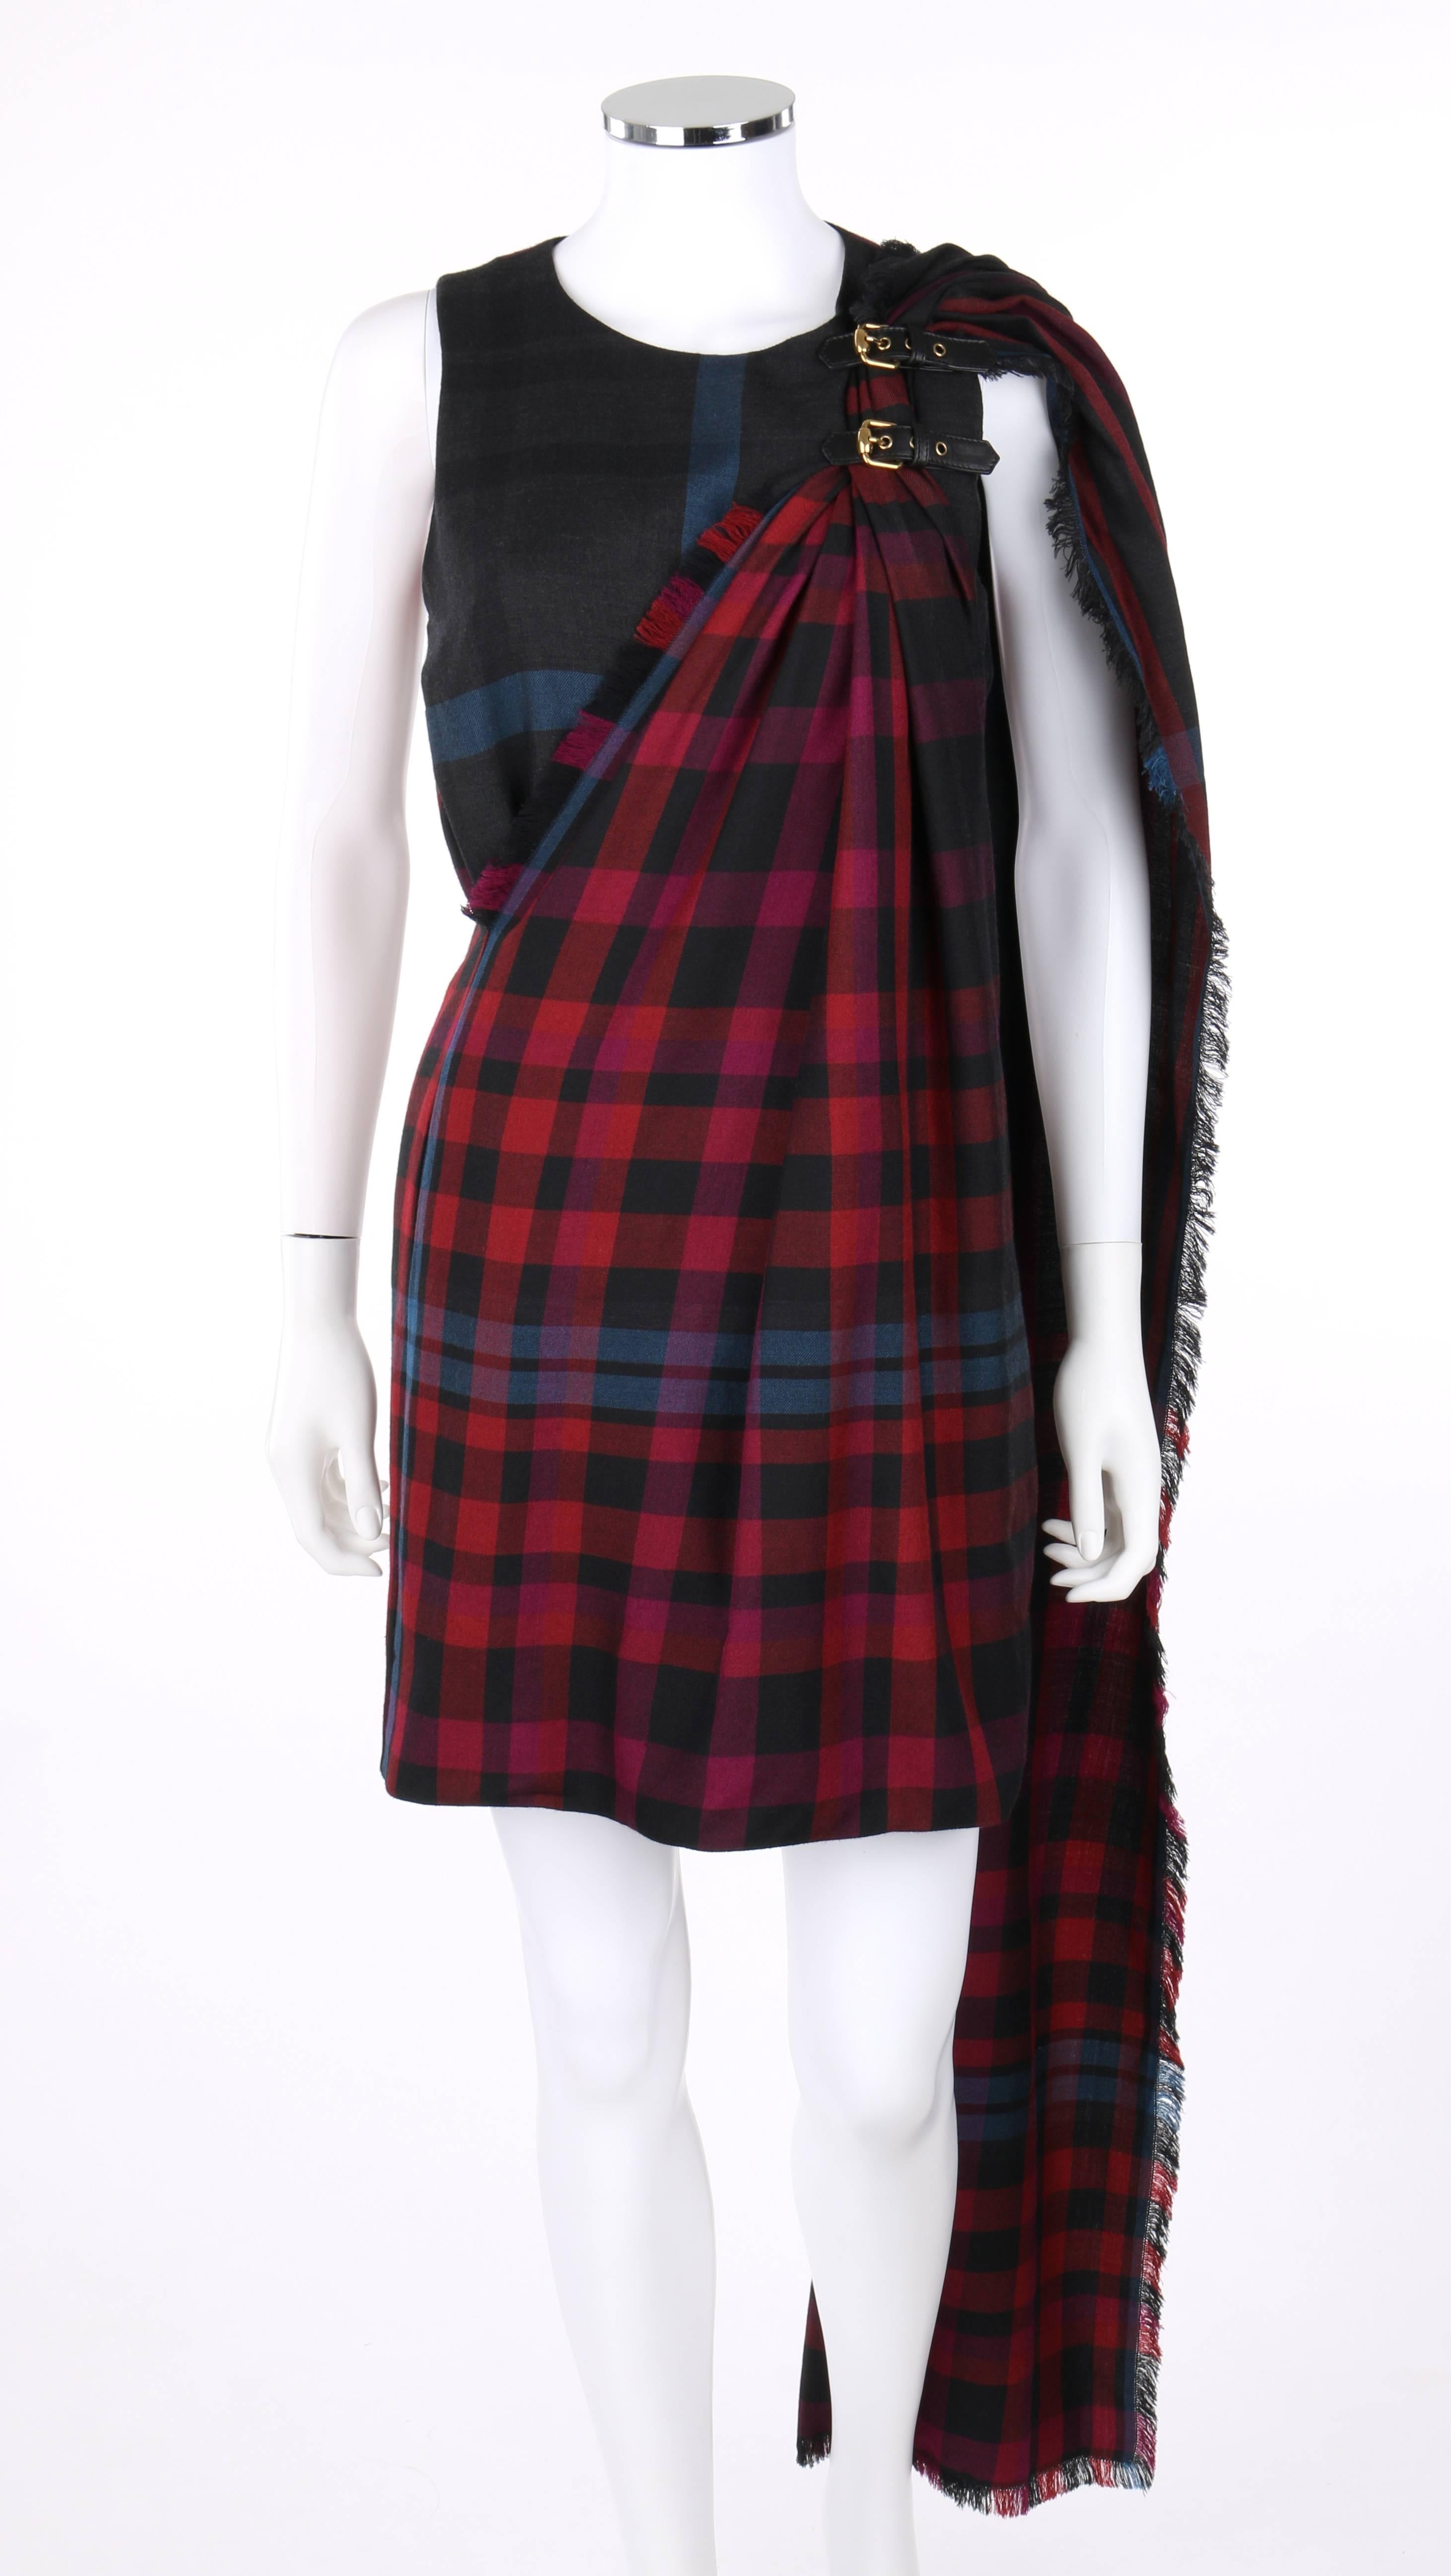 Gucci Autumn/Winter 2008 red and blue tartan plaid kilt shift dress; new with tags. Tartan plaid in shades of red, burgundy, black and blue. Sleeveless shift style. Scoop neckline. Two adjustable black leather straps with gold-toned buckles at left